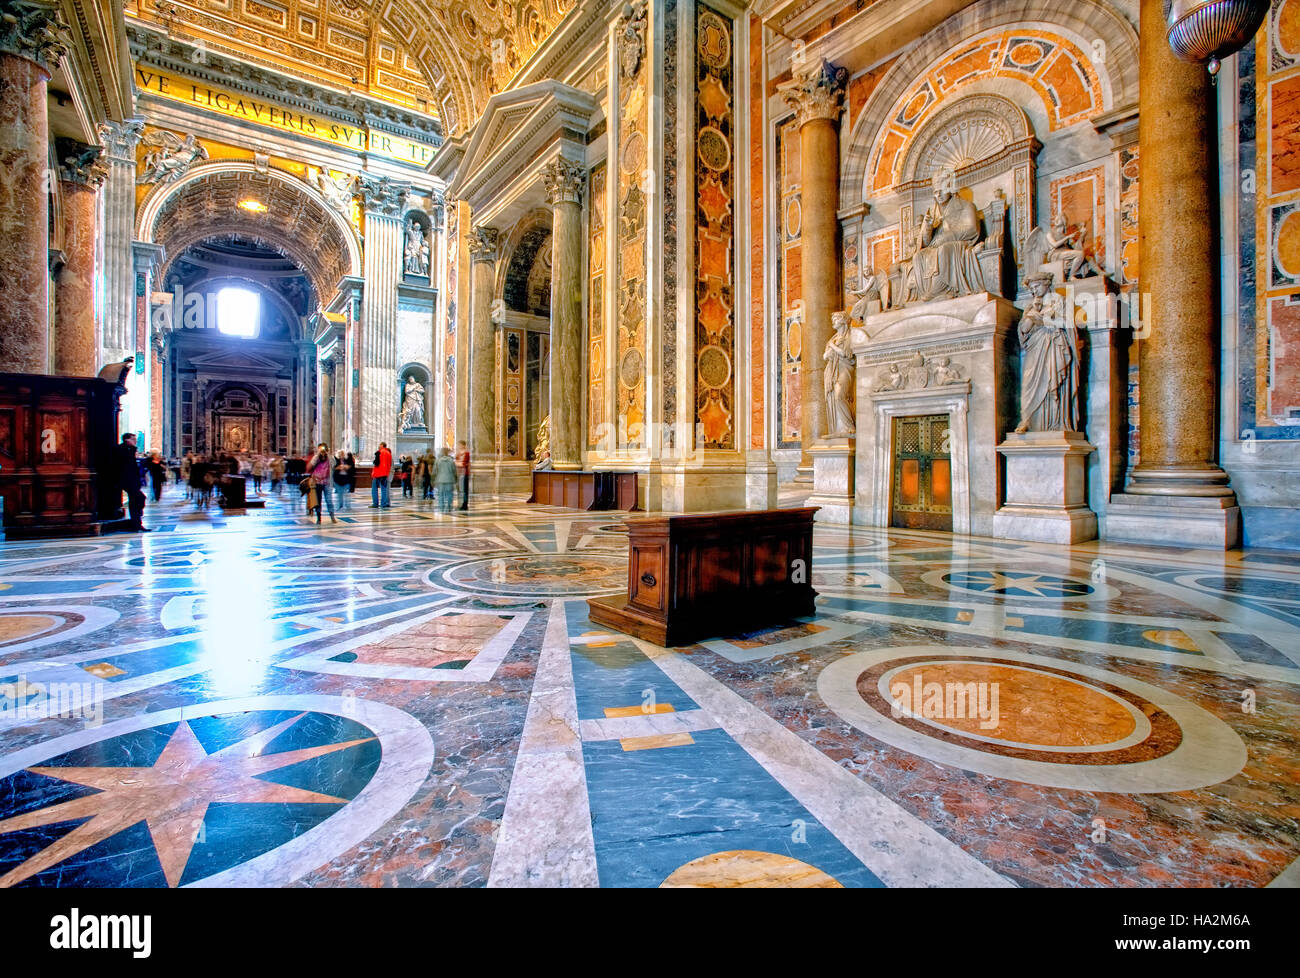 Interior of St Peter's Basilica in Rome, Italy Stock Photo